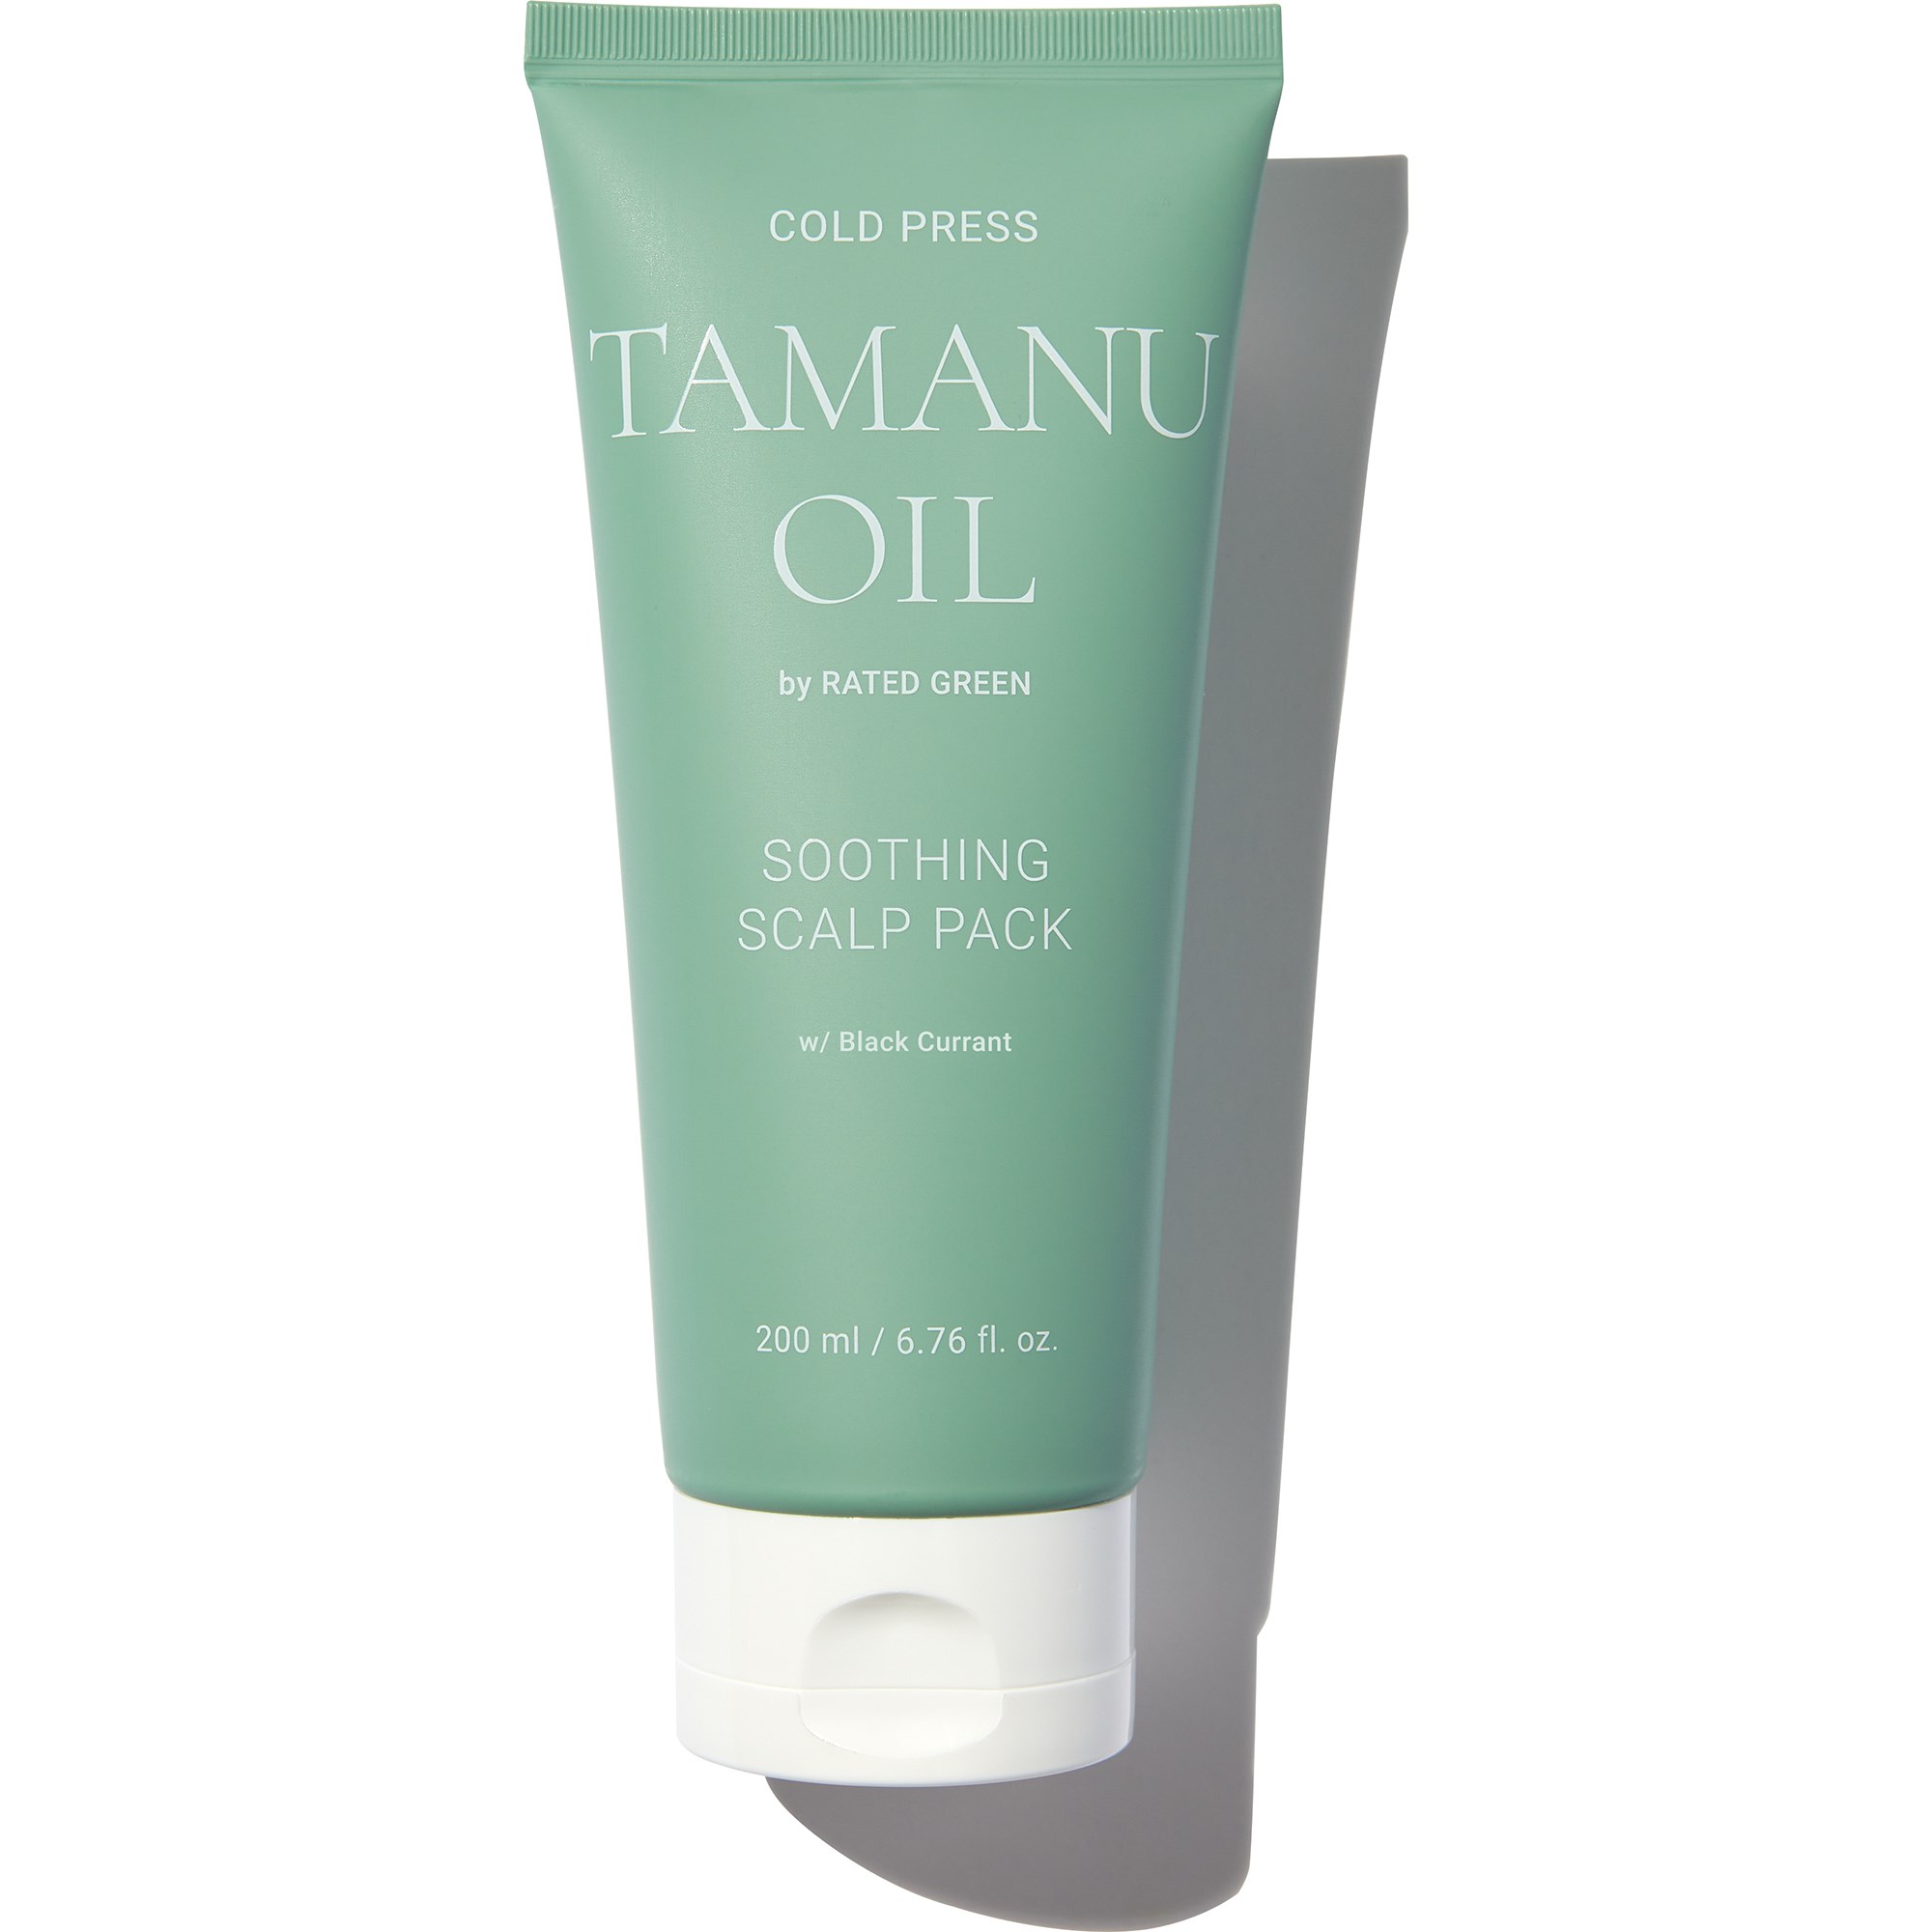 Rated Green Scalp Pack Cold Press Tamanu Oil Soothing Scalp Pack